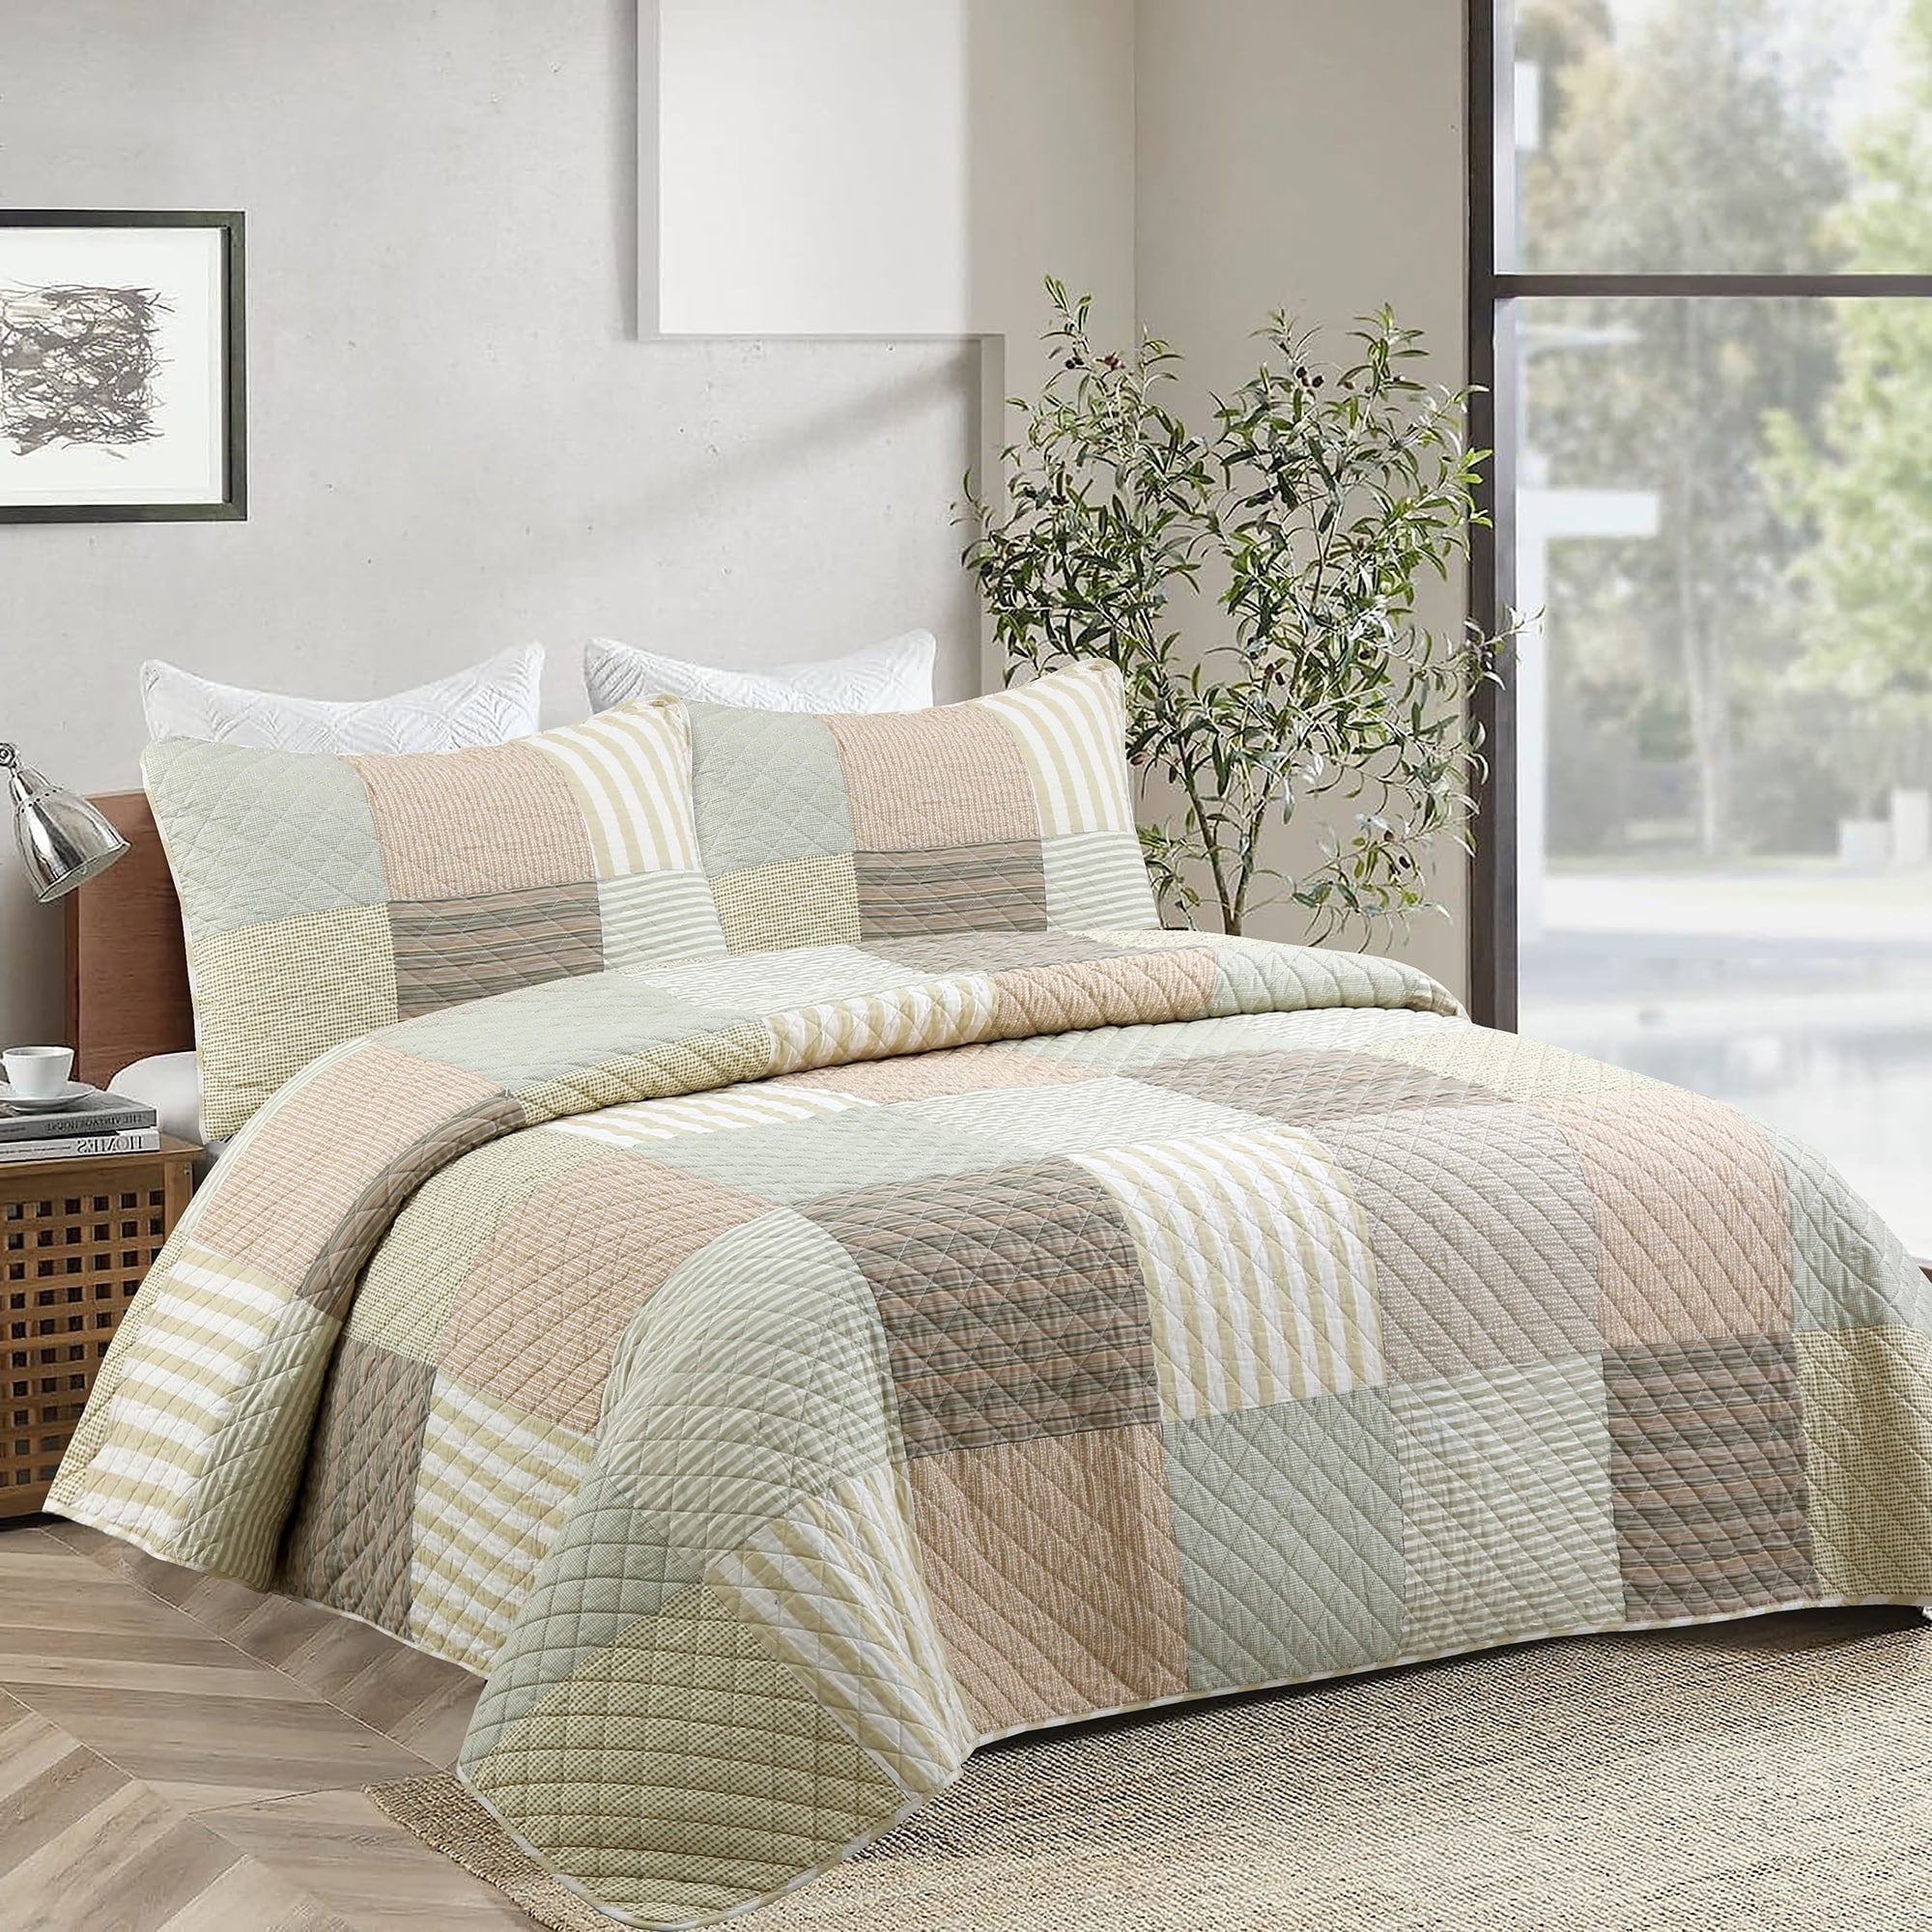 Cabin & Lodge Quilts and Bedspreads - Bed Bath & Beyond